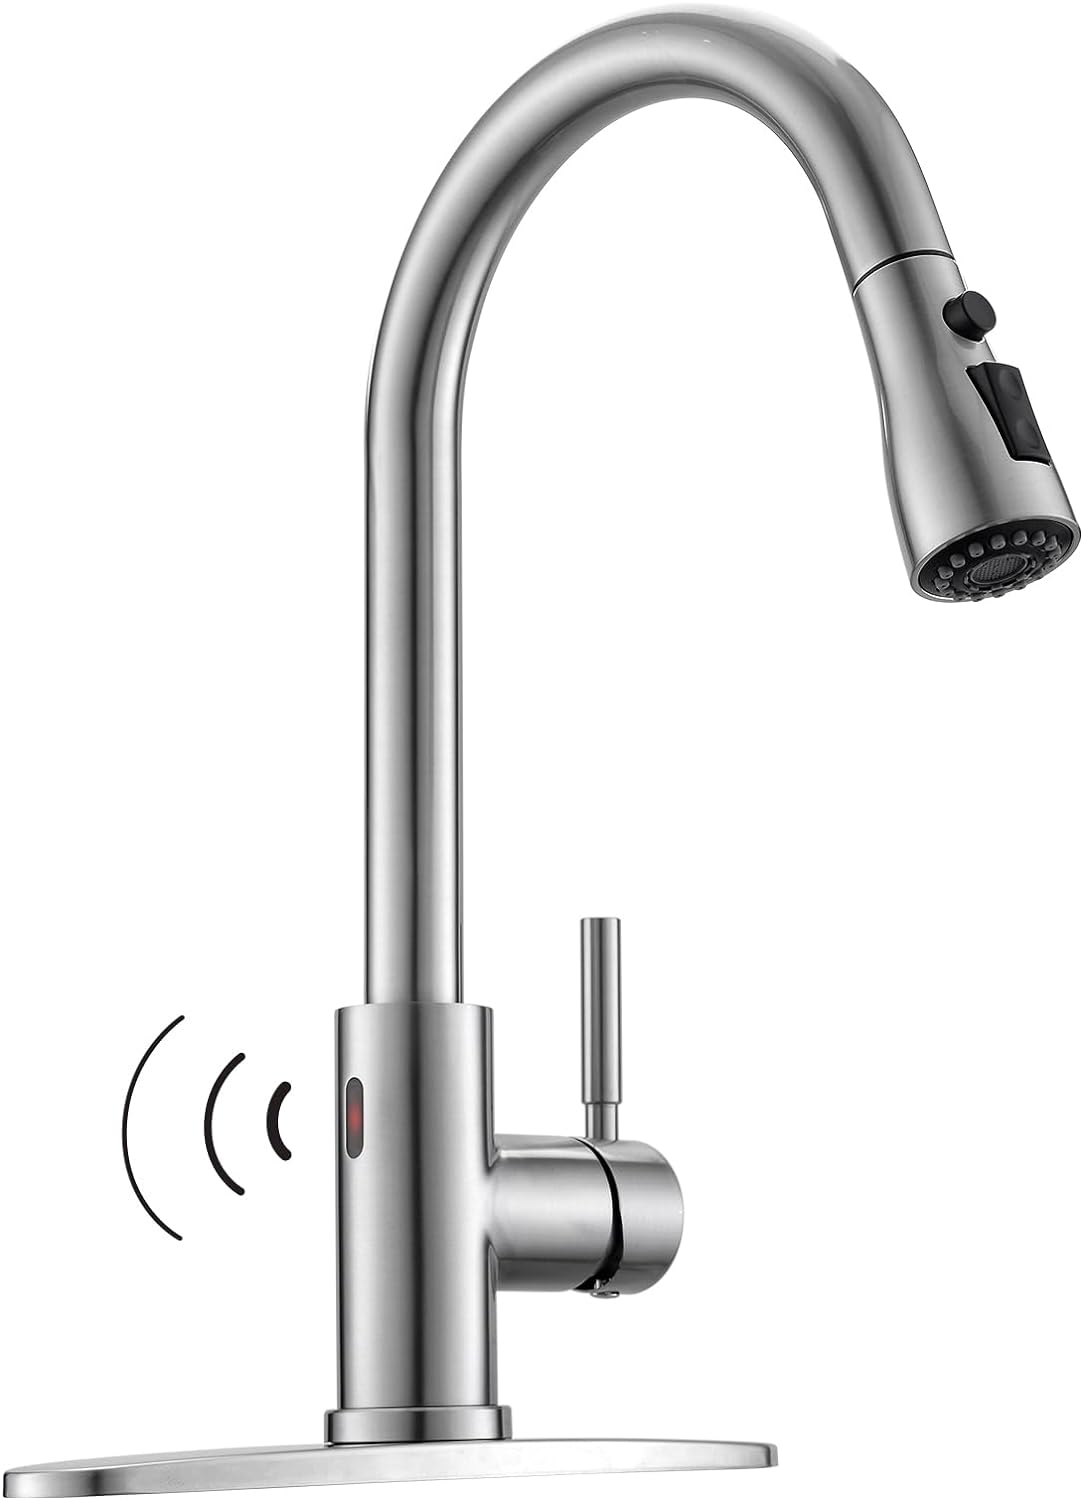 WEWE Touchless Kitchen Faucet with Pull Down Sprayer - Single Handle Kitchen Faucets Smart Motion Sensor Stainless Steel Brushed Nickel Sink Faucet